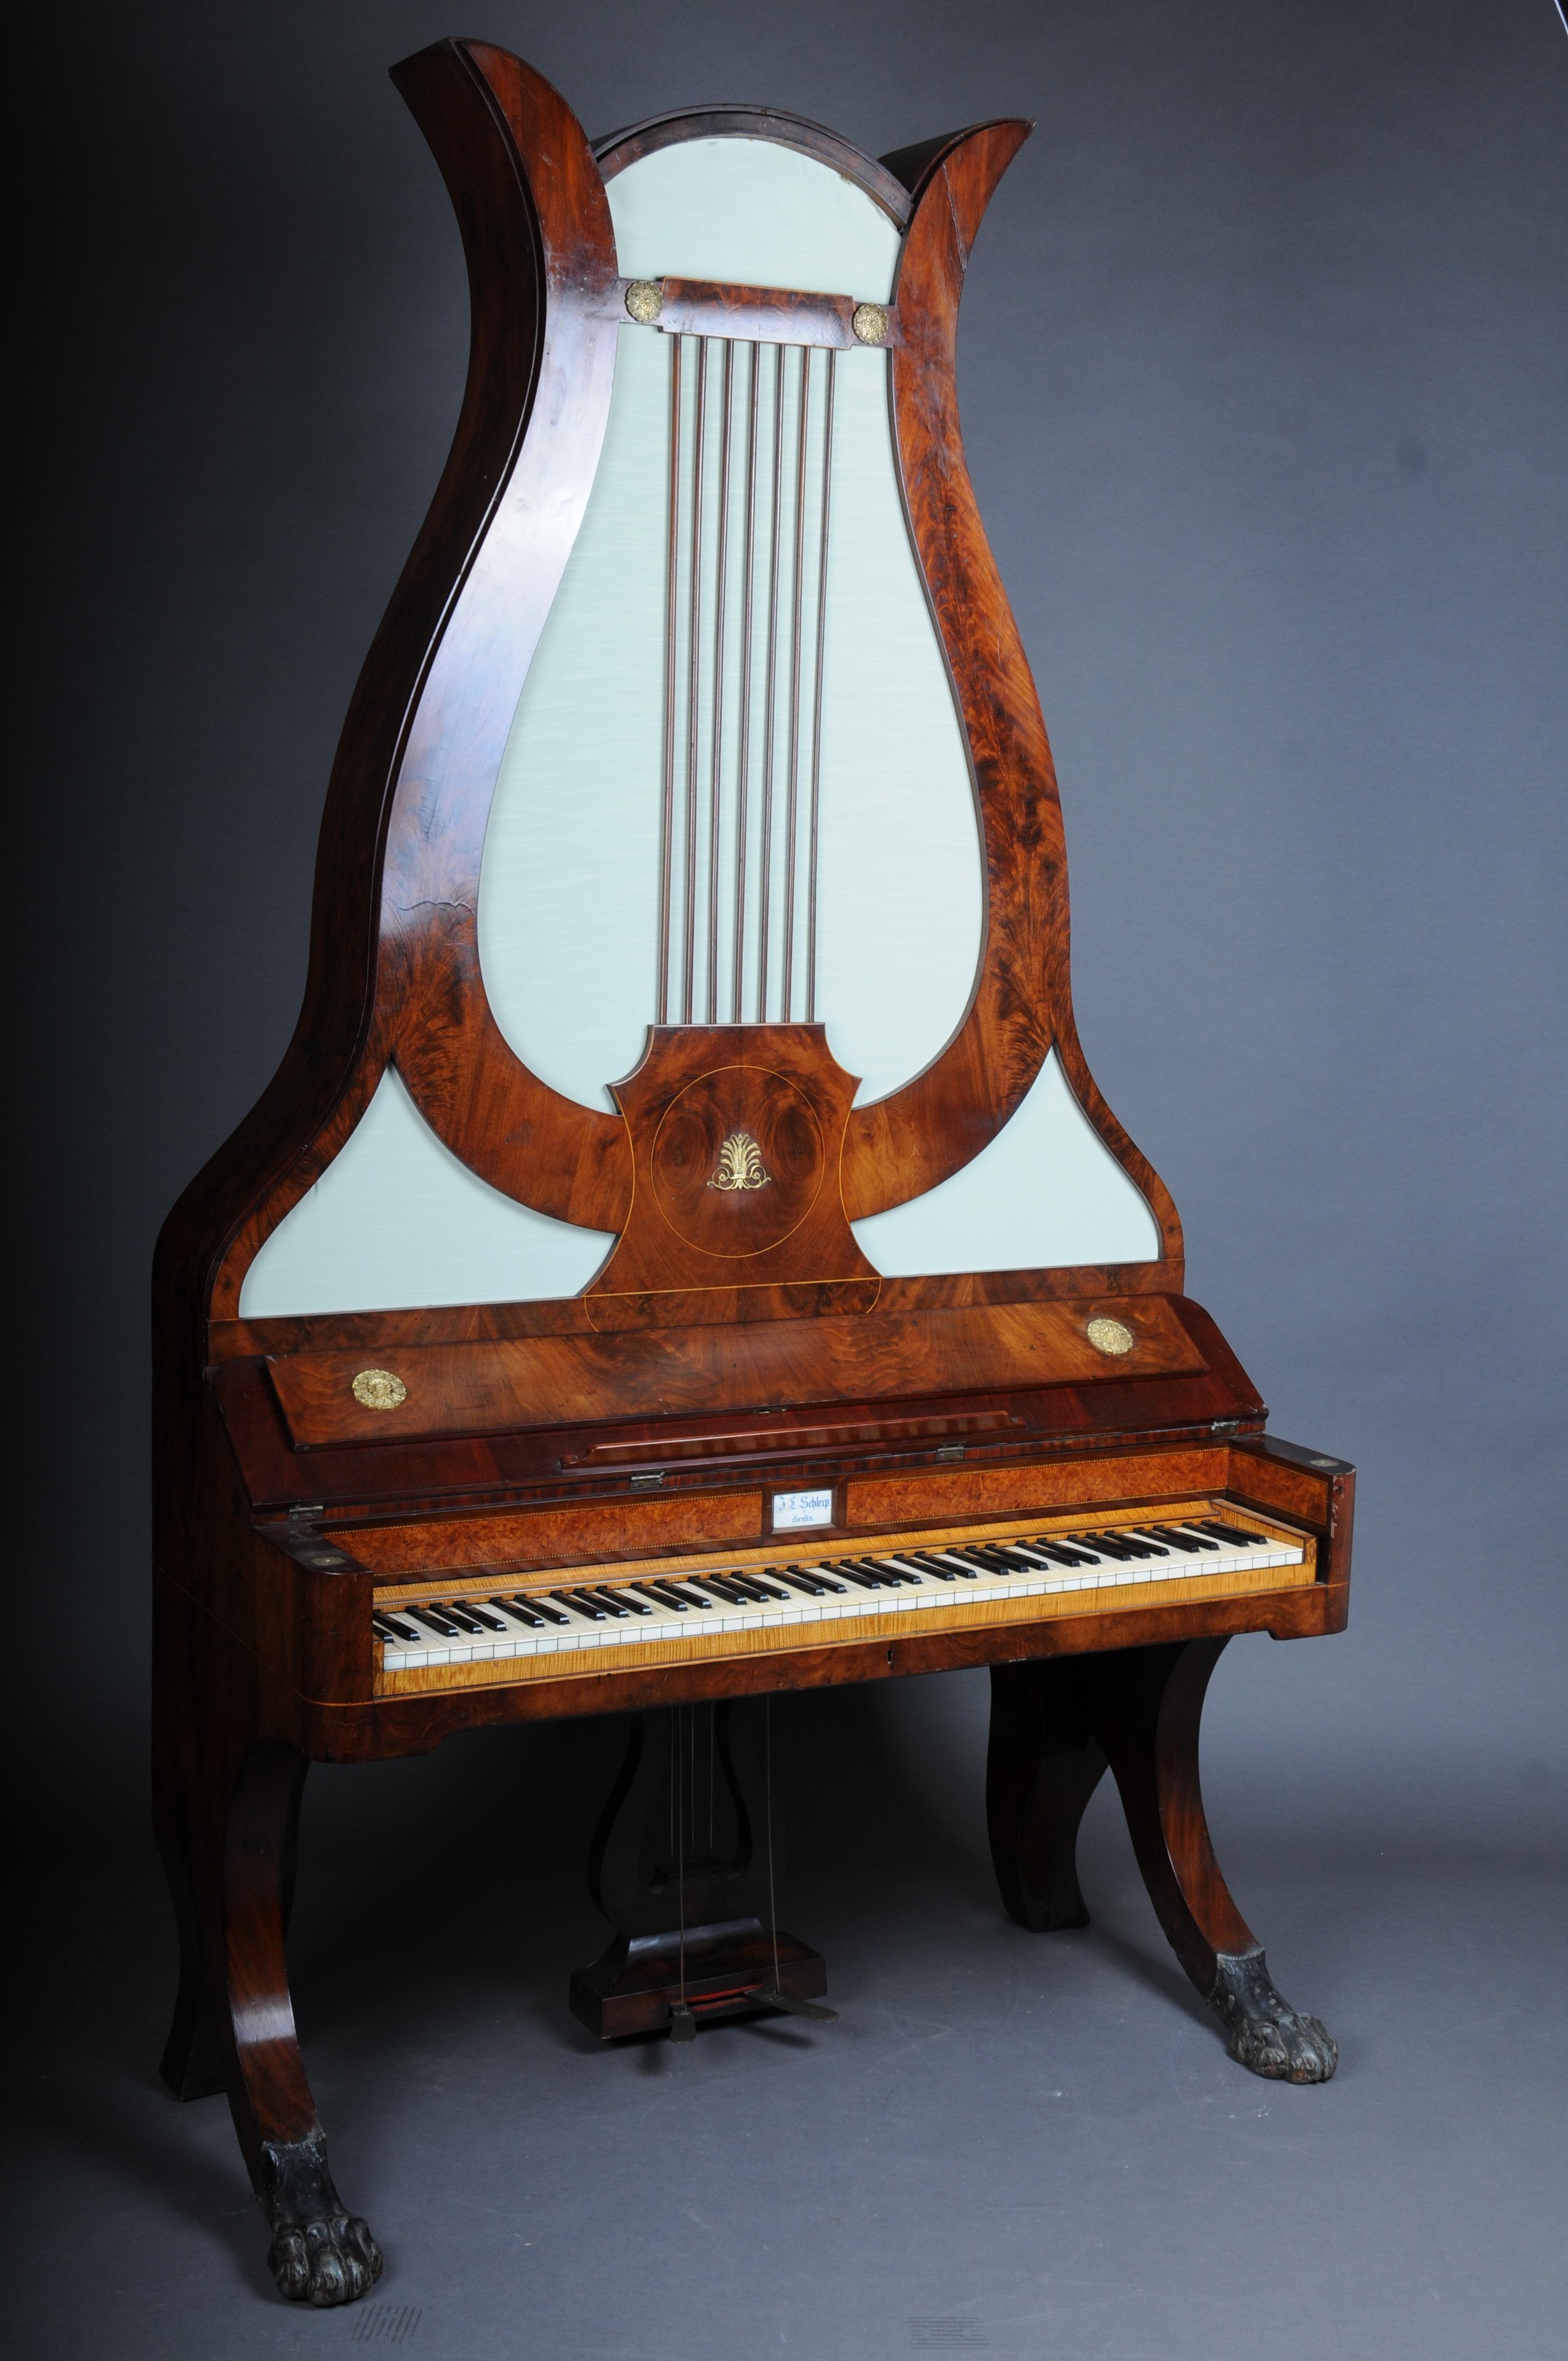 Lyre piano attributed to Johann Christian Schleip, Berlin, around 1825, case veneered with mahogany, upper part in the form of a large lyre with 7 wooden sides (lyre), cover and cheeks made of mahogany with decorative strings, keyboard,

Johann